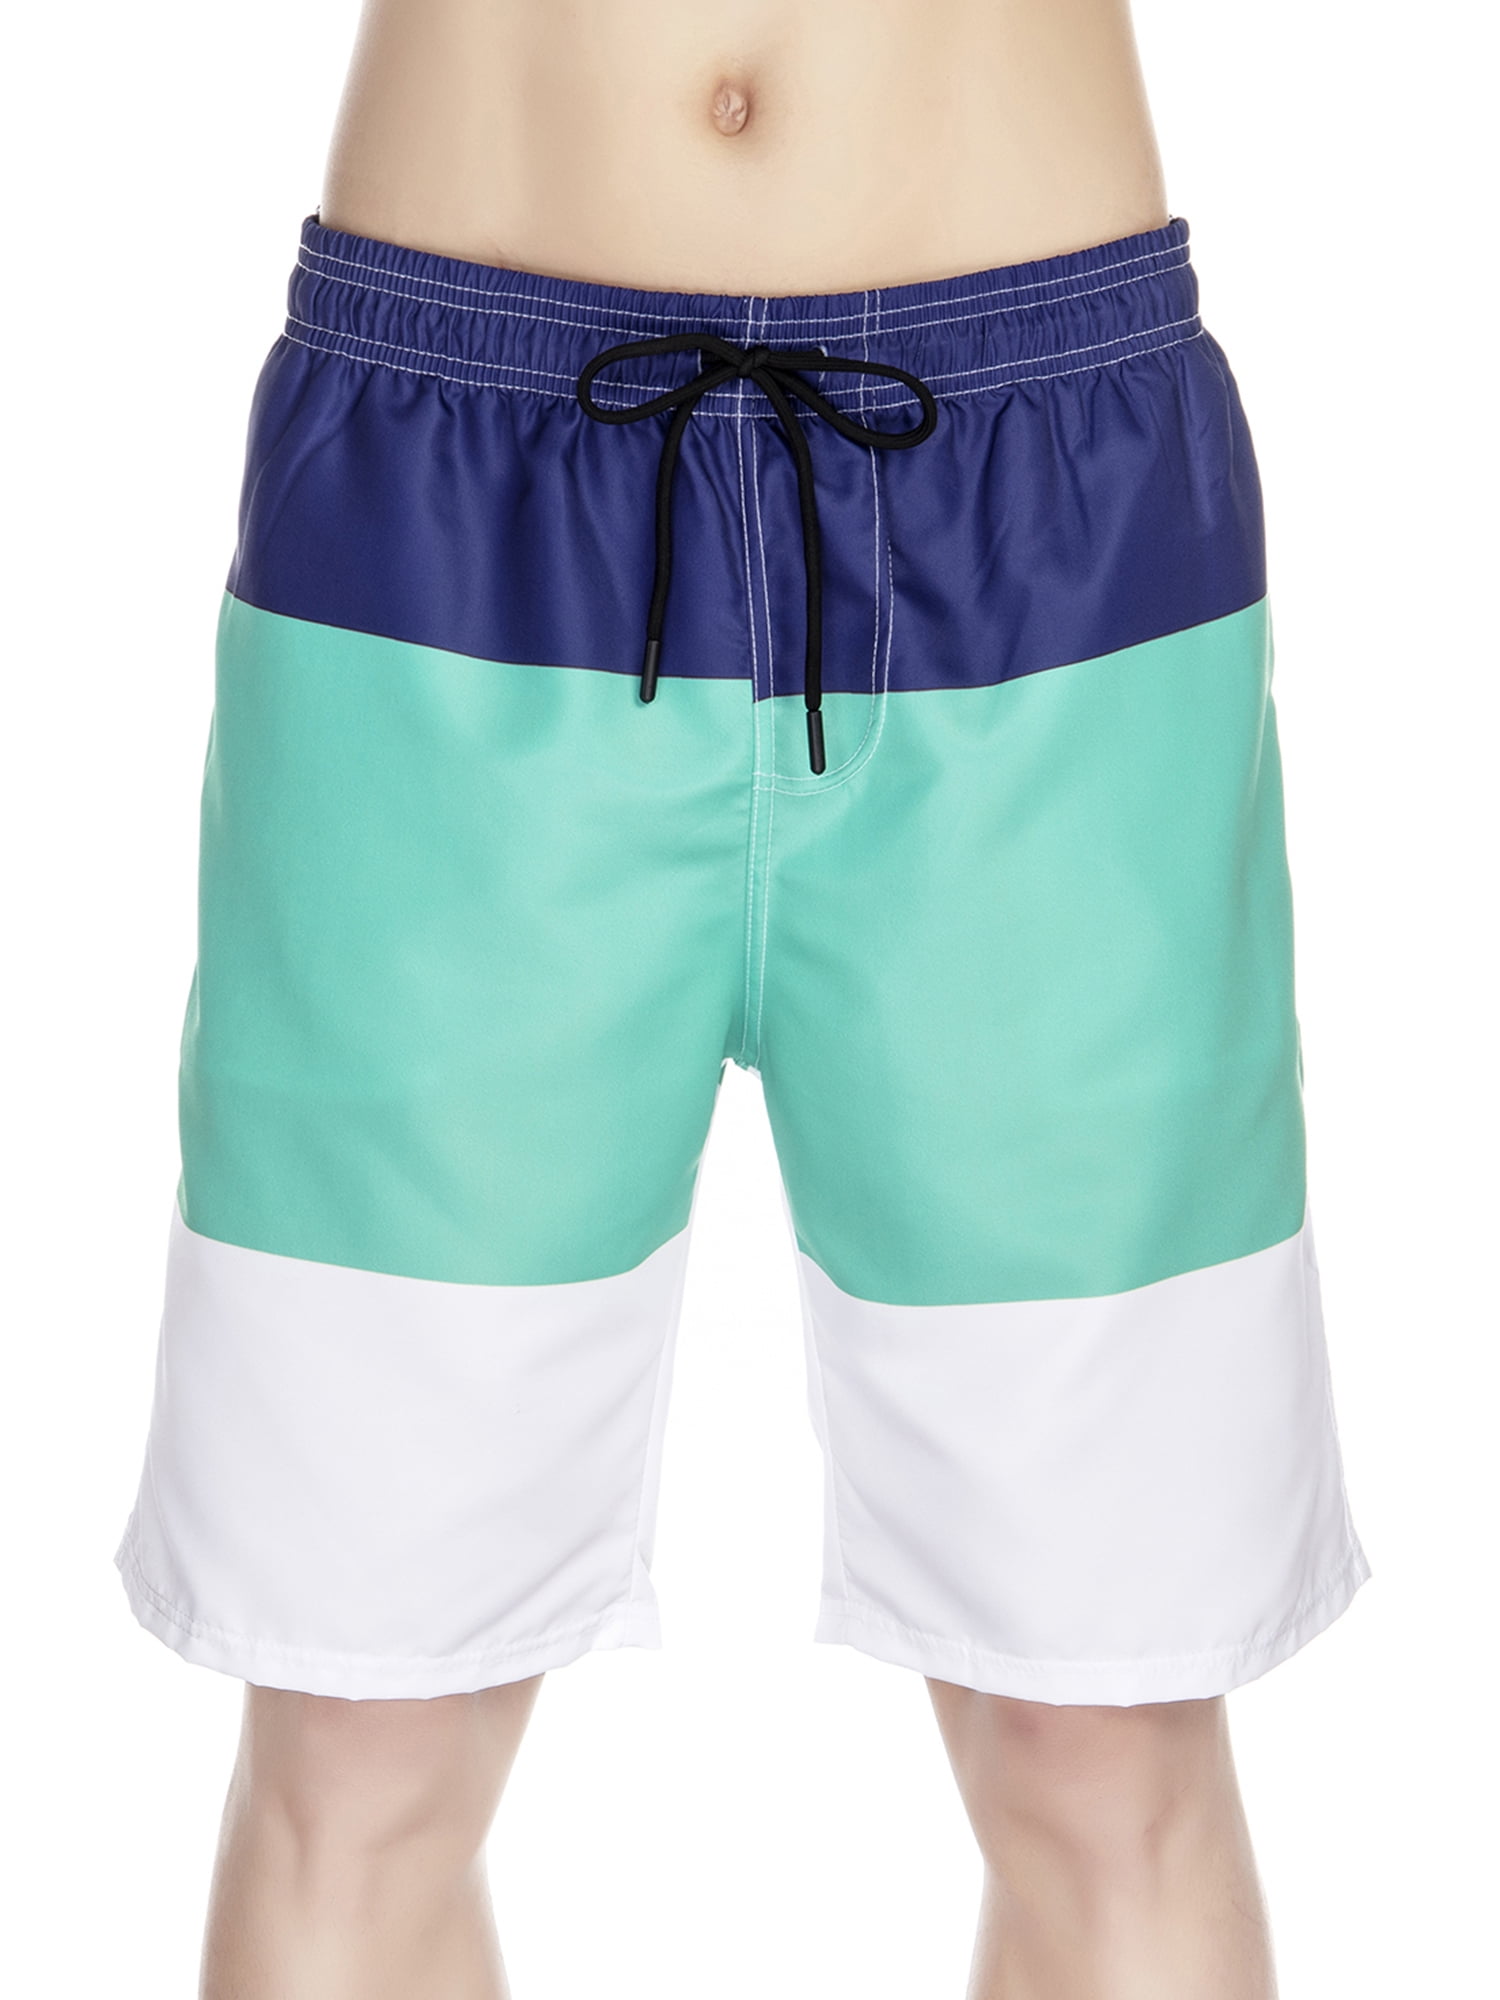 KIOT156 Cute Egg and Avocado Casual Summer Surfing Trunks Surf Board Shorts Beach Shorts with Pockets for Men